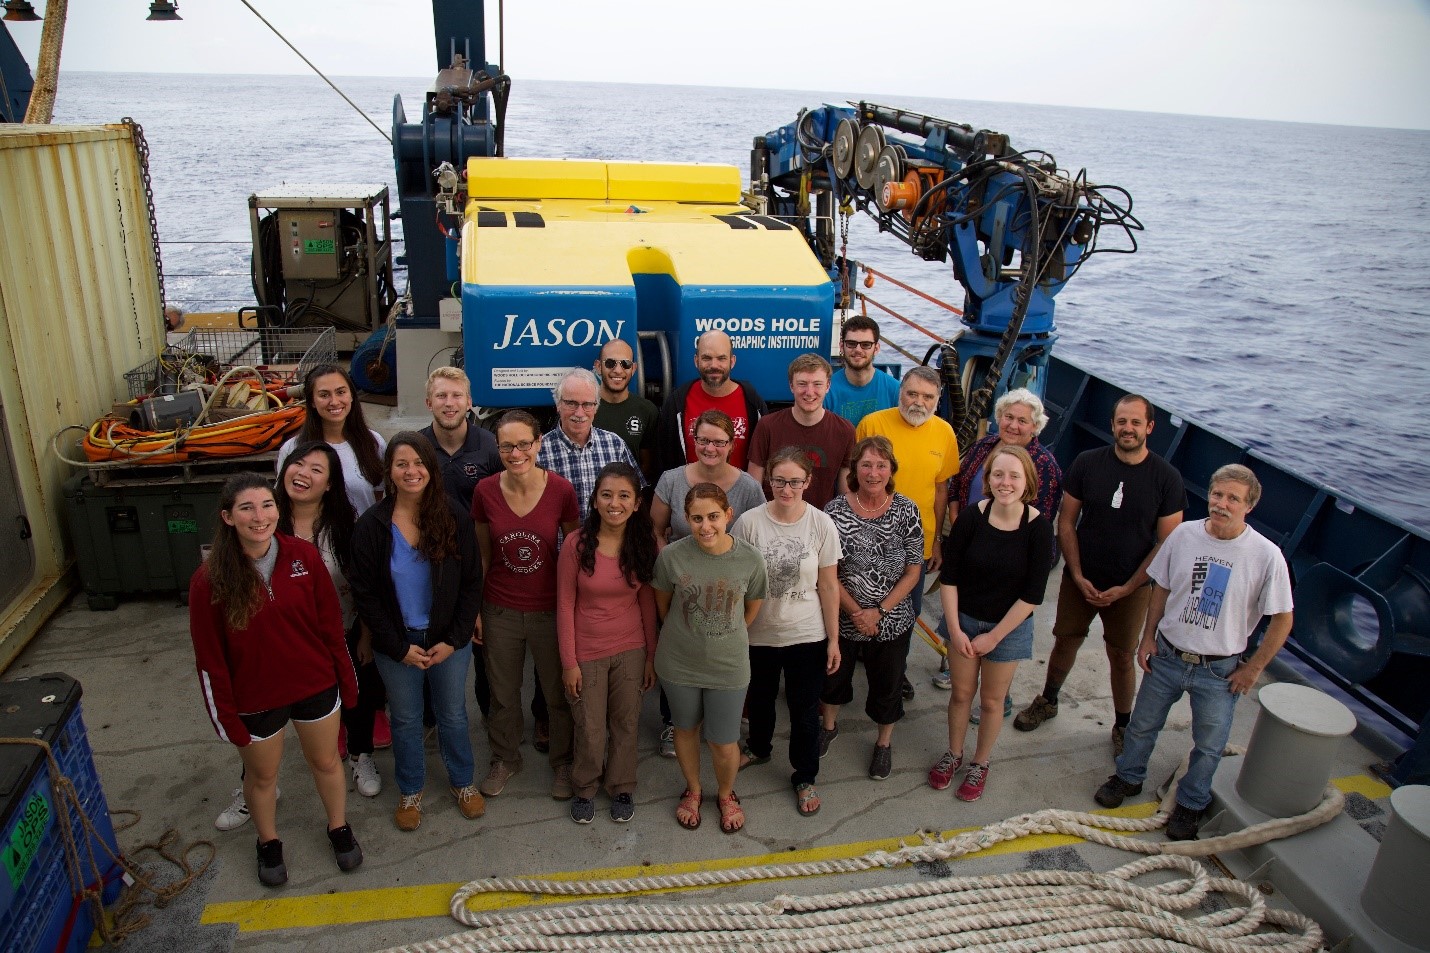 The scientific crew onboard R/V Atlantis, (Wee pictured second from the left) for the research cruise to the LCHF, AT42-01. The ROV (Remotely Operated Vehicle) Jason, primarily used for retrieving fluid and chimney samples, is pictured in the background. (Image Credit: Scientific Party of AT42-01 Cruise onboard the R/V Atlantis. Chief Scientist: Susan Lang. Copyright Woods Hole Oceanographic Institute. Photographed by Ronnie Whims and Mitch Elend.)